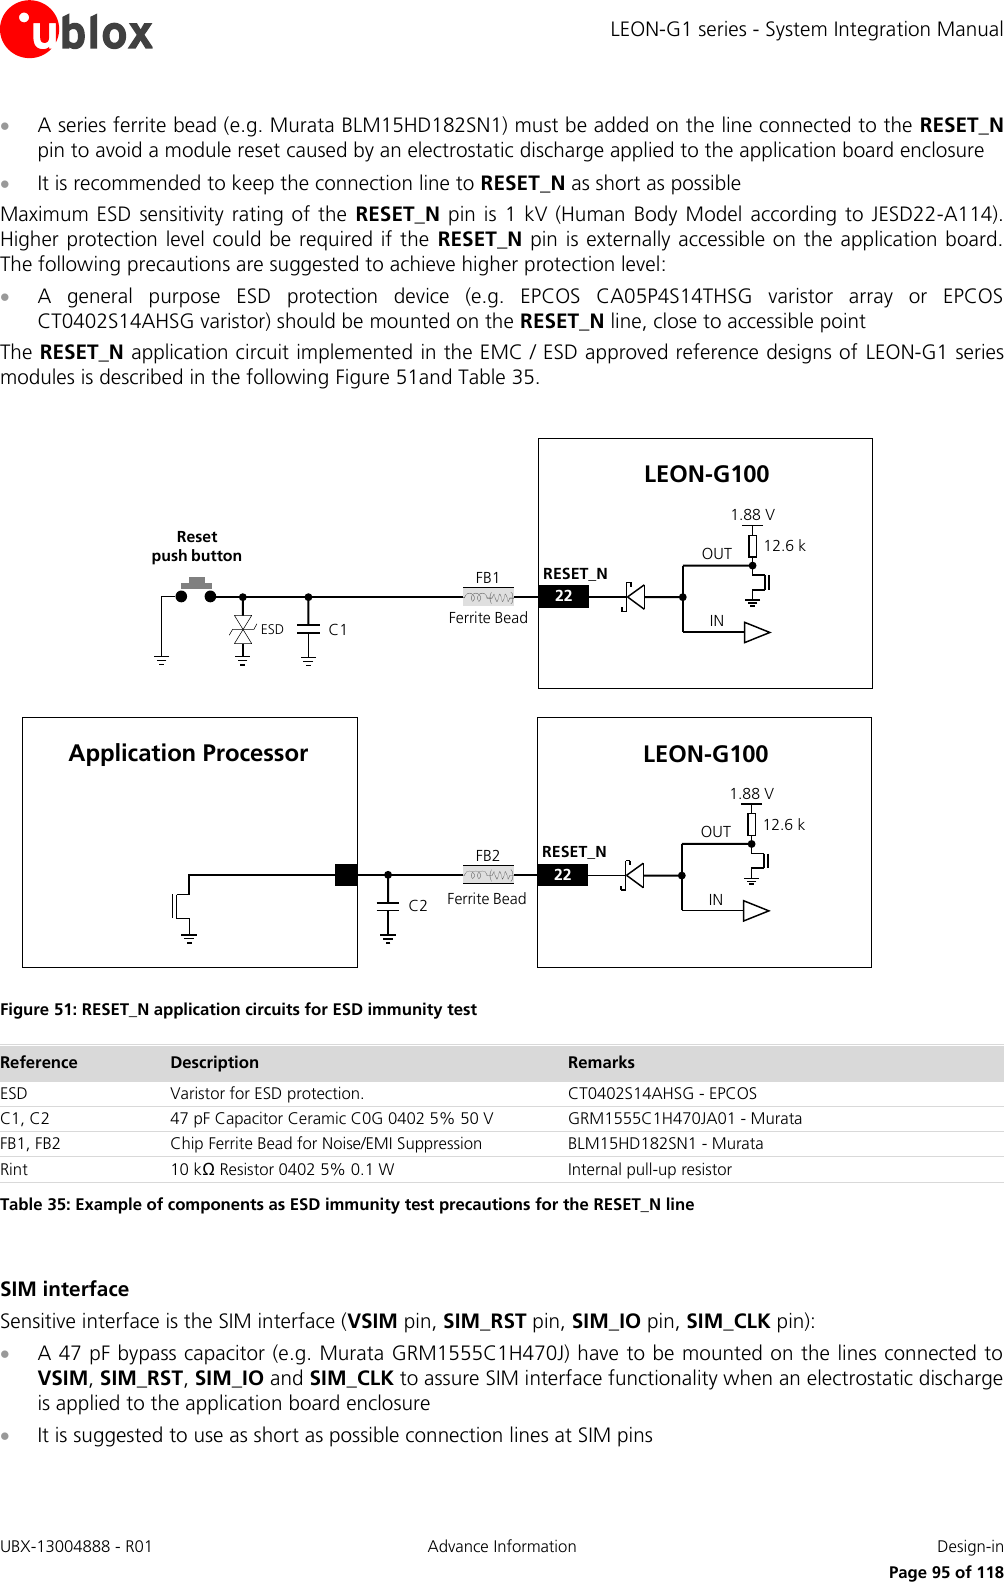 LEON-G1 series - System Integration Manual UBX-13004888 - R01  Advance Information  Design-in      Page 95 of 118  A series ferrite bead (e.g. Murata BLM15HD182SN1) must be added on the line connected to the RESET_N pin to avoid a module reset caused by an electrostatic discharge applied to the application board enclosure  It is recommended to keep the connection line to RESET_N as short as possible Maximum ESD  sensitivity rating of the  RESET_N pin is 1 kV (Human  Body Model  according to JESD22-A114). Higher protection level could be required if the  RESET_N pin is externally accessible on the application board. The following precautions are suggested to achieve higher protection level:  A  general  purpose  ESD  protection  device  (e.g.  EPCOS  CA05P4S14THSG  varistor  array  or  EPCOS CT0402S14AHSG varistor) should be mounted on the RESET_N line, close to accessible point The RESET_N application circuit implemented in the EMC / ESD approved reference designs of  LEON-G1 series modules is described in the following Figure 51and Table 35.  Reset           push button OUTINLEON-G10012.6 k1.88 V22RESET_NOUTINLEON-G10012.6 k1.88 V22RESET_NApplication ProcessorFB2FB1C2C1ESD Ferrite BeadFerrite Bead Figure 51: RESET_N application circuits for ESD immunity test Reference Description Remarks ESD Varistor for ESD protection. CT0402S14AHSG - EPCOS C1, C2 47 pF Capacitor Ceramic C0G 0402 5% 50 V GRM1555C1H470JA01 - Murata FB1, FB2 Chip Ferrite Bead for Noise/EMI Suppression BLM15HD182SN1 - Murata Rint 10 kΩ Resistor 0402 5% 0.1 W Internal pull-up resistor Table 35: Example of components as ESD immunity test precautions for the RESET_N line  SIM interface Sensitive interface is the SIM interface (VSIM pin, SIM_RST pin, SIM_IO pin, SIM_CLK pin):  A 47 pF bypass capacitor (e.g. Murata GRM1555C1H470J) have to be mounted on the lines connected to VSIM, SIM_RST, SIM_IO and SIM_CLK to assure SIM interface functionality when an electrostatic discharge is applied to the application board enclosure  It is suggested to use as short as possible connection lines at SIM pins 